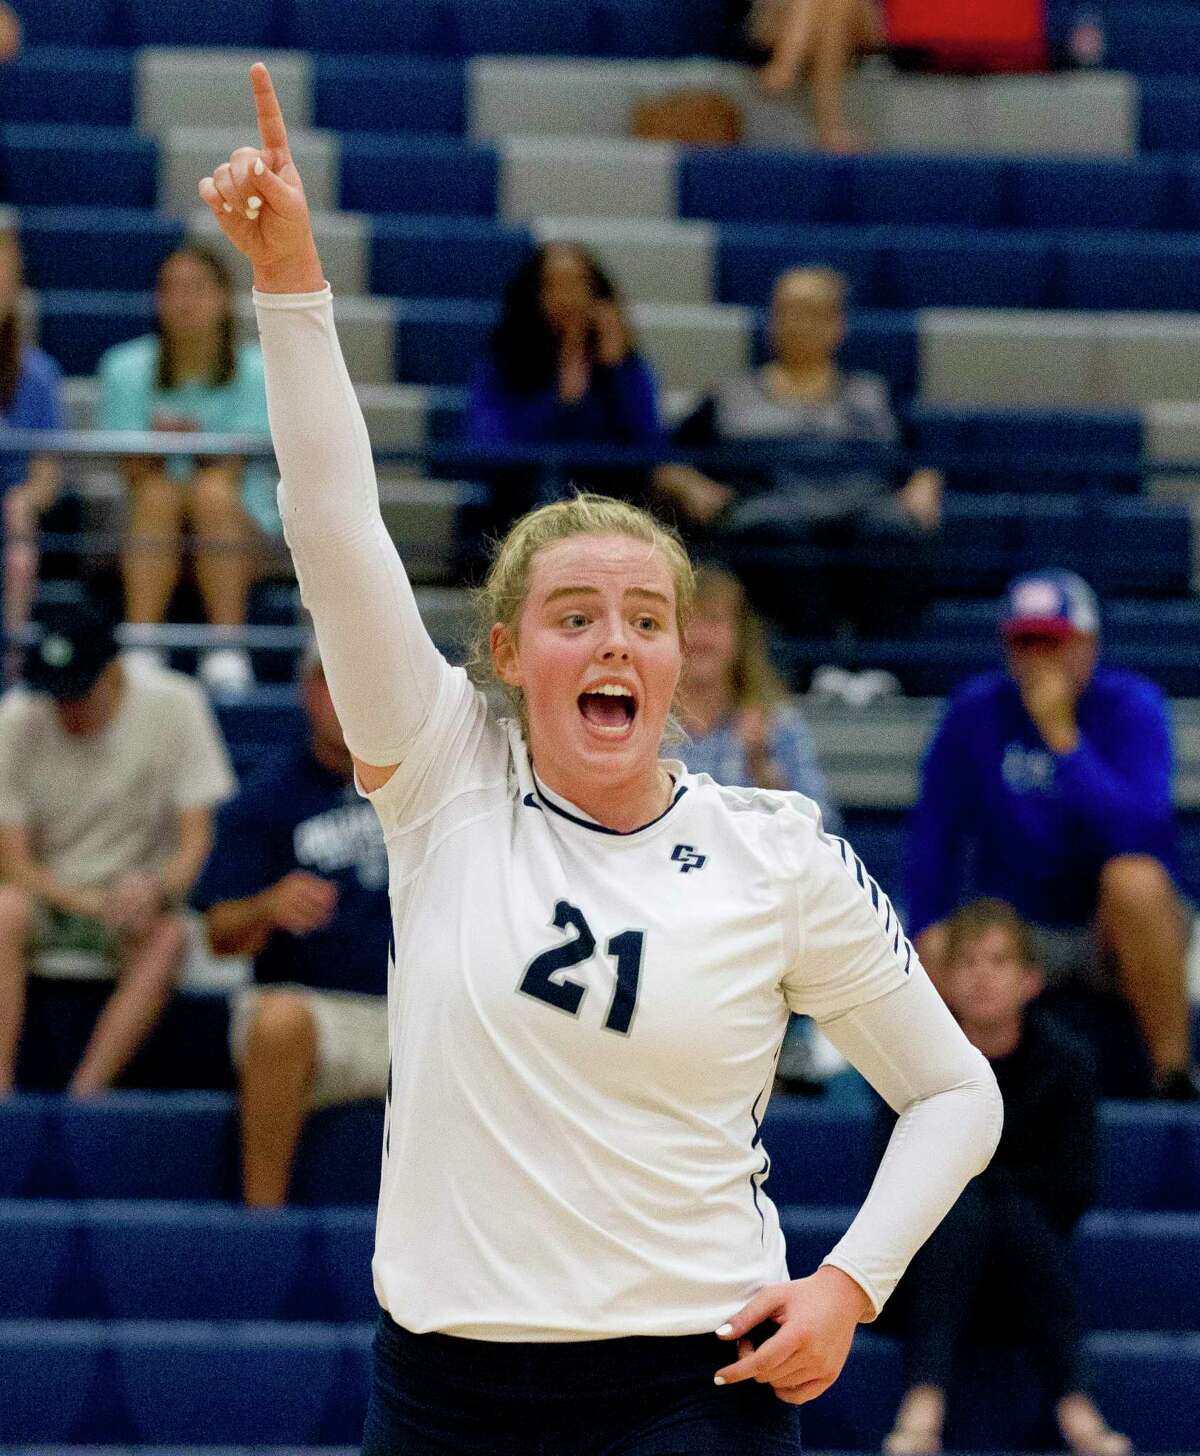 College Park setter Annie Cooke (21) reacts after a point in the first set of a match during the Kingwood Invitational volleyball tournament at Kingwood High School, Saturday, Aug. 17, 2019, in Kingwood.